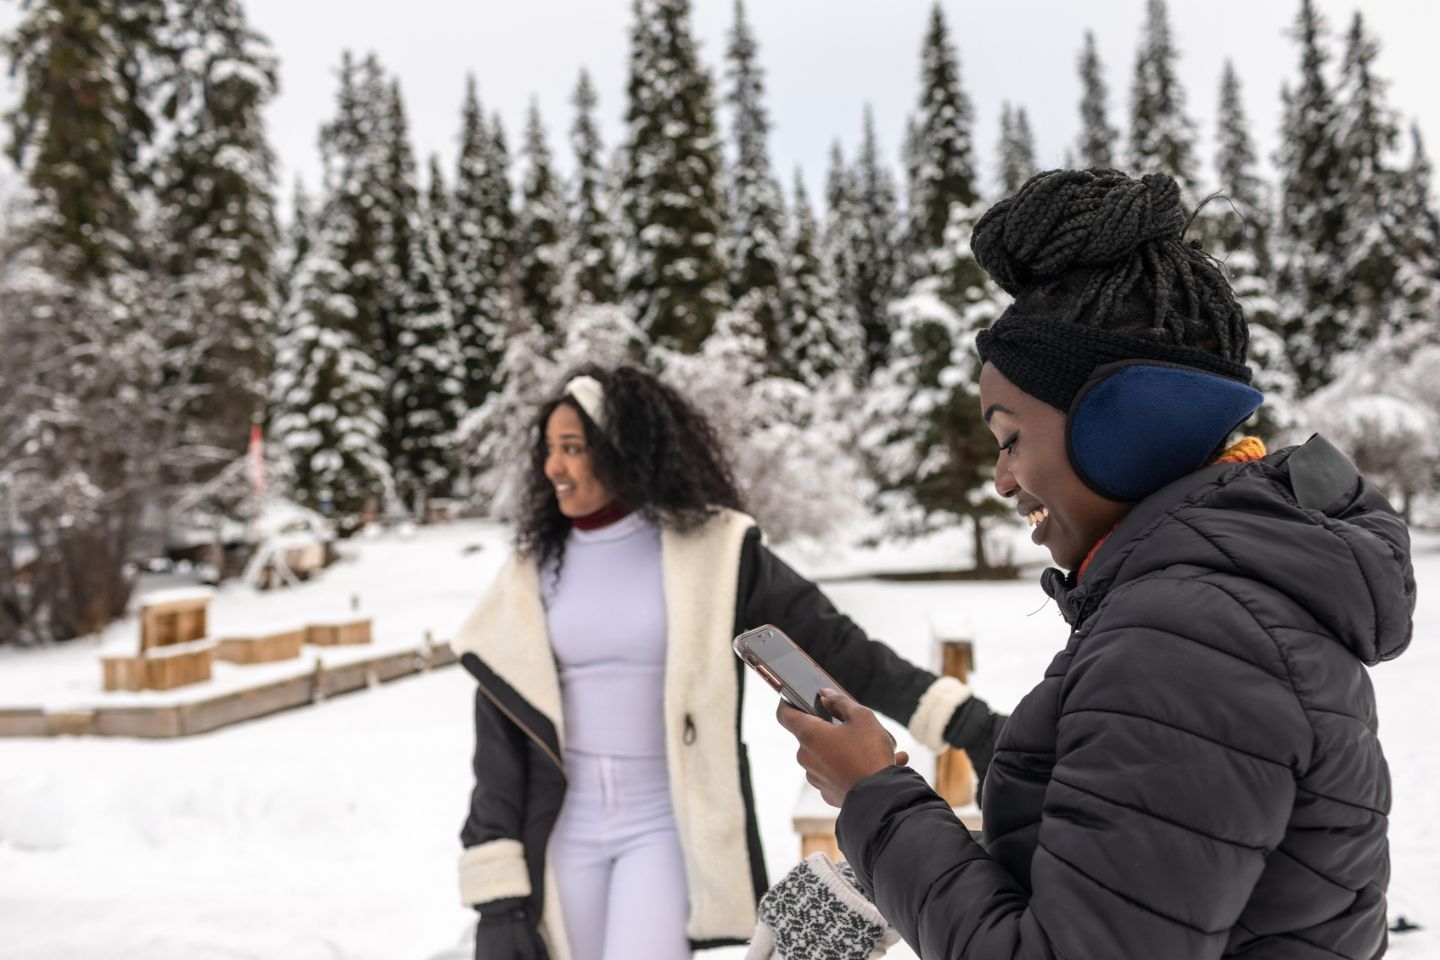 From Ice Canoeing to Winter Carnivals, Here Are The Ultimate Winter Experiences Québec Has To Offer